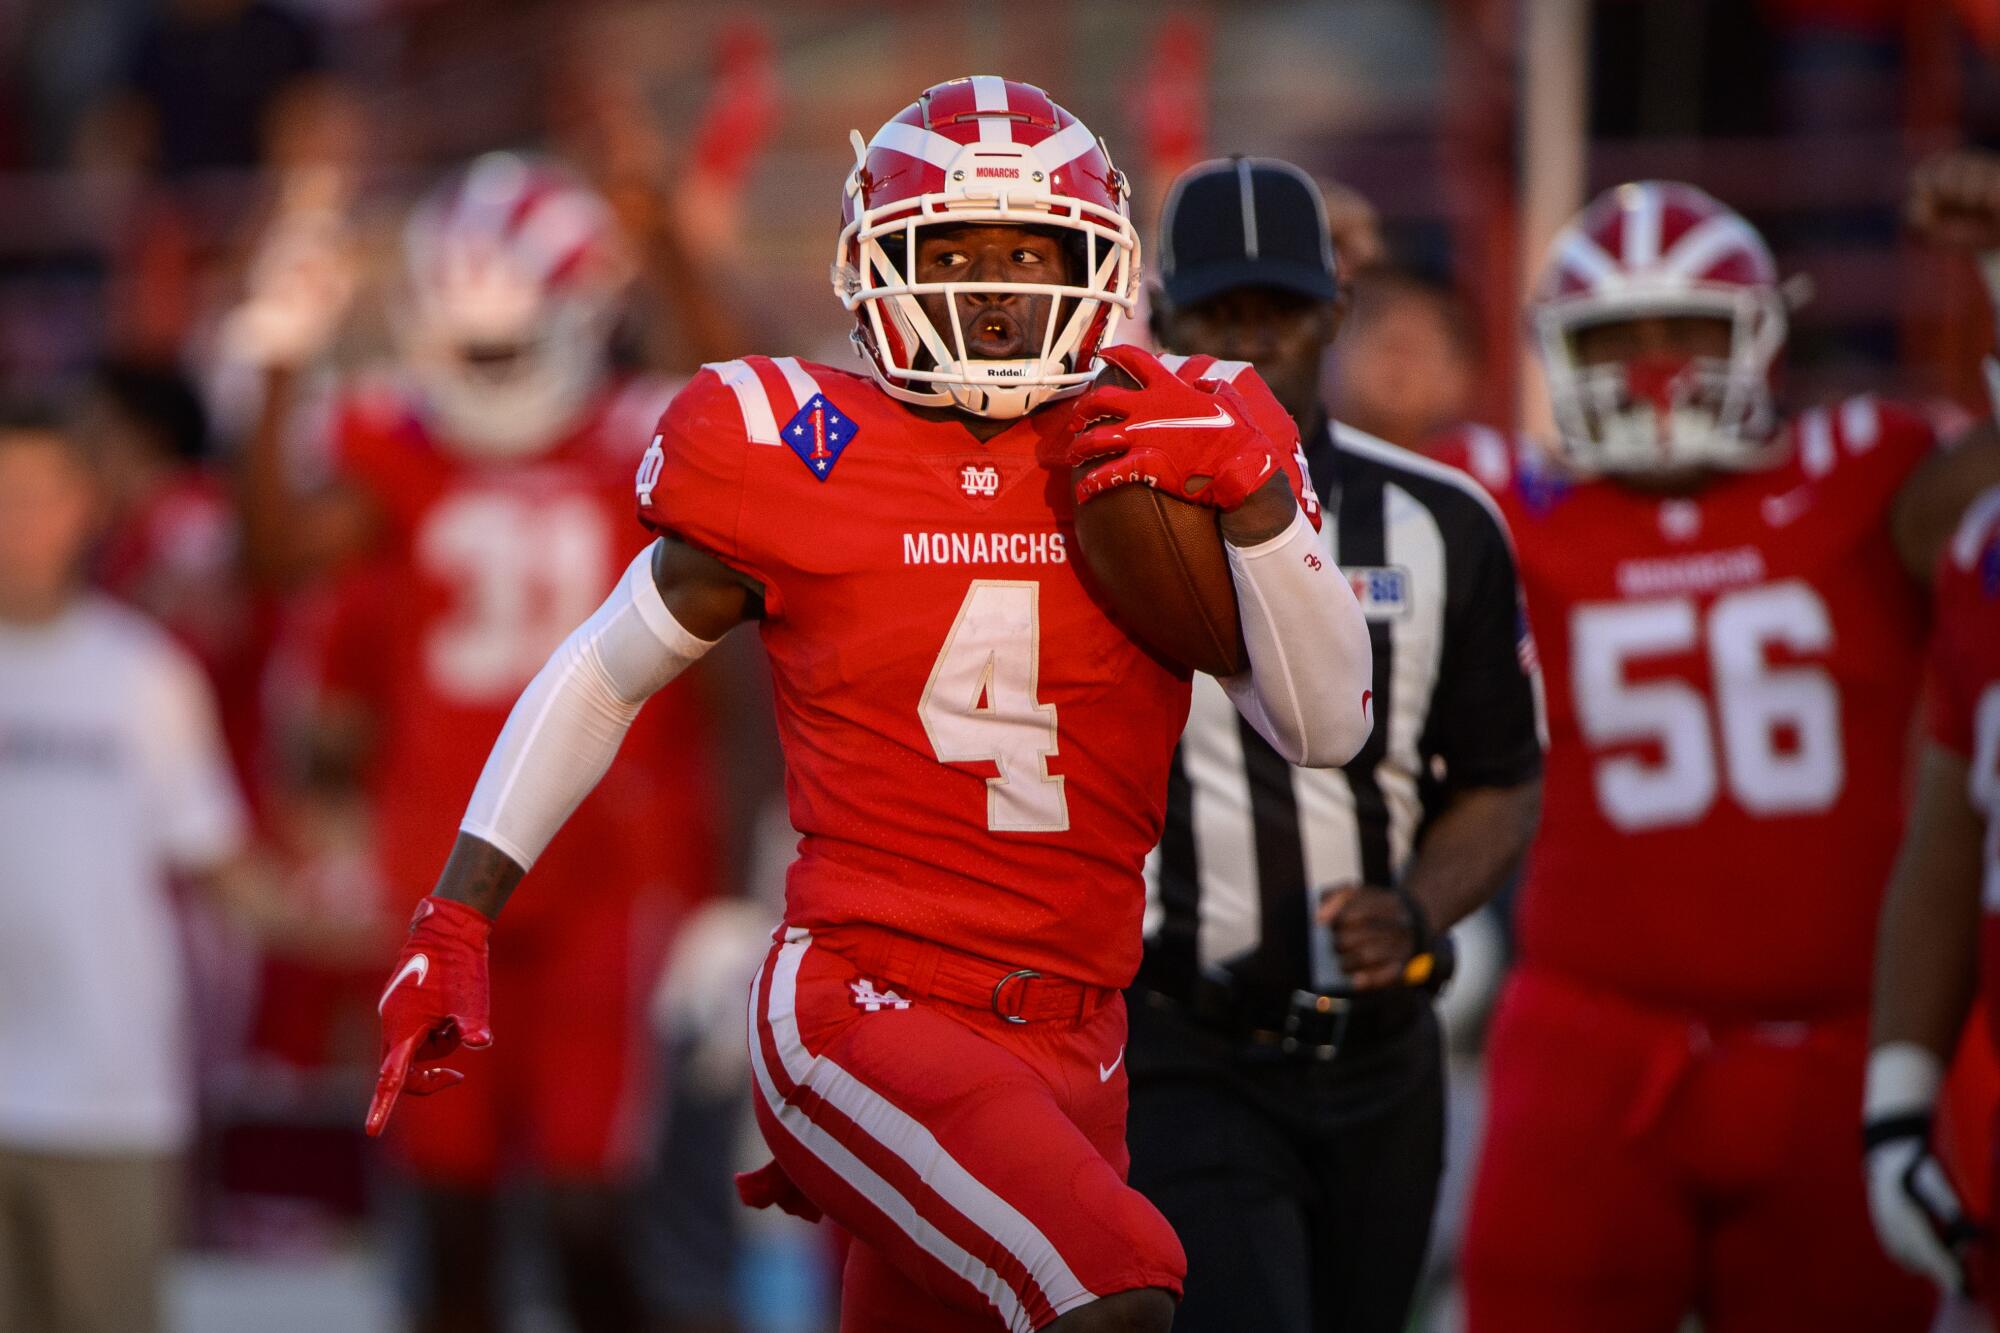 Raleek Brown scores a touchdown for Mater Dei during a game against Duncanville in Texas in August 2021.